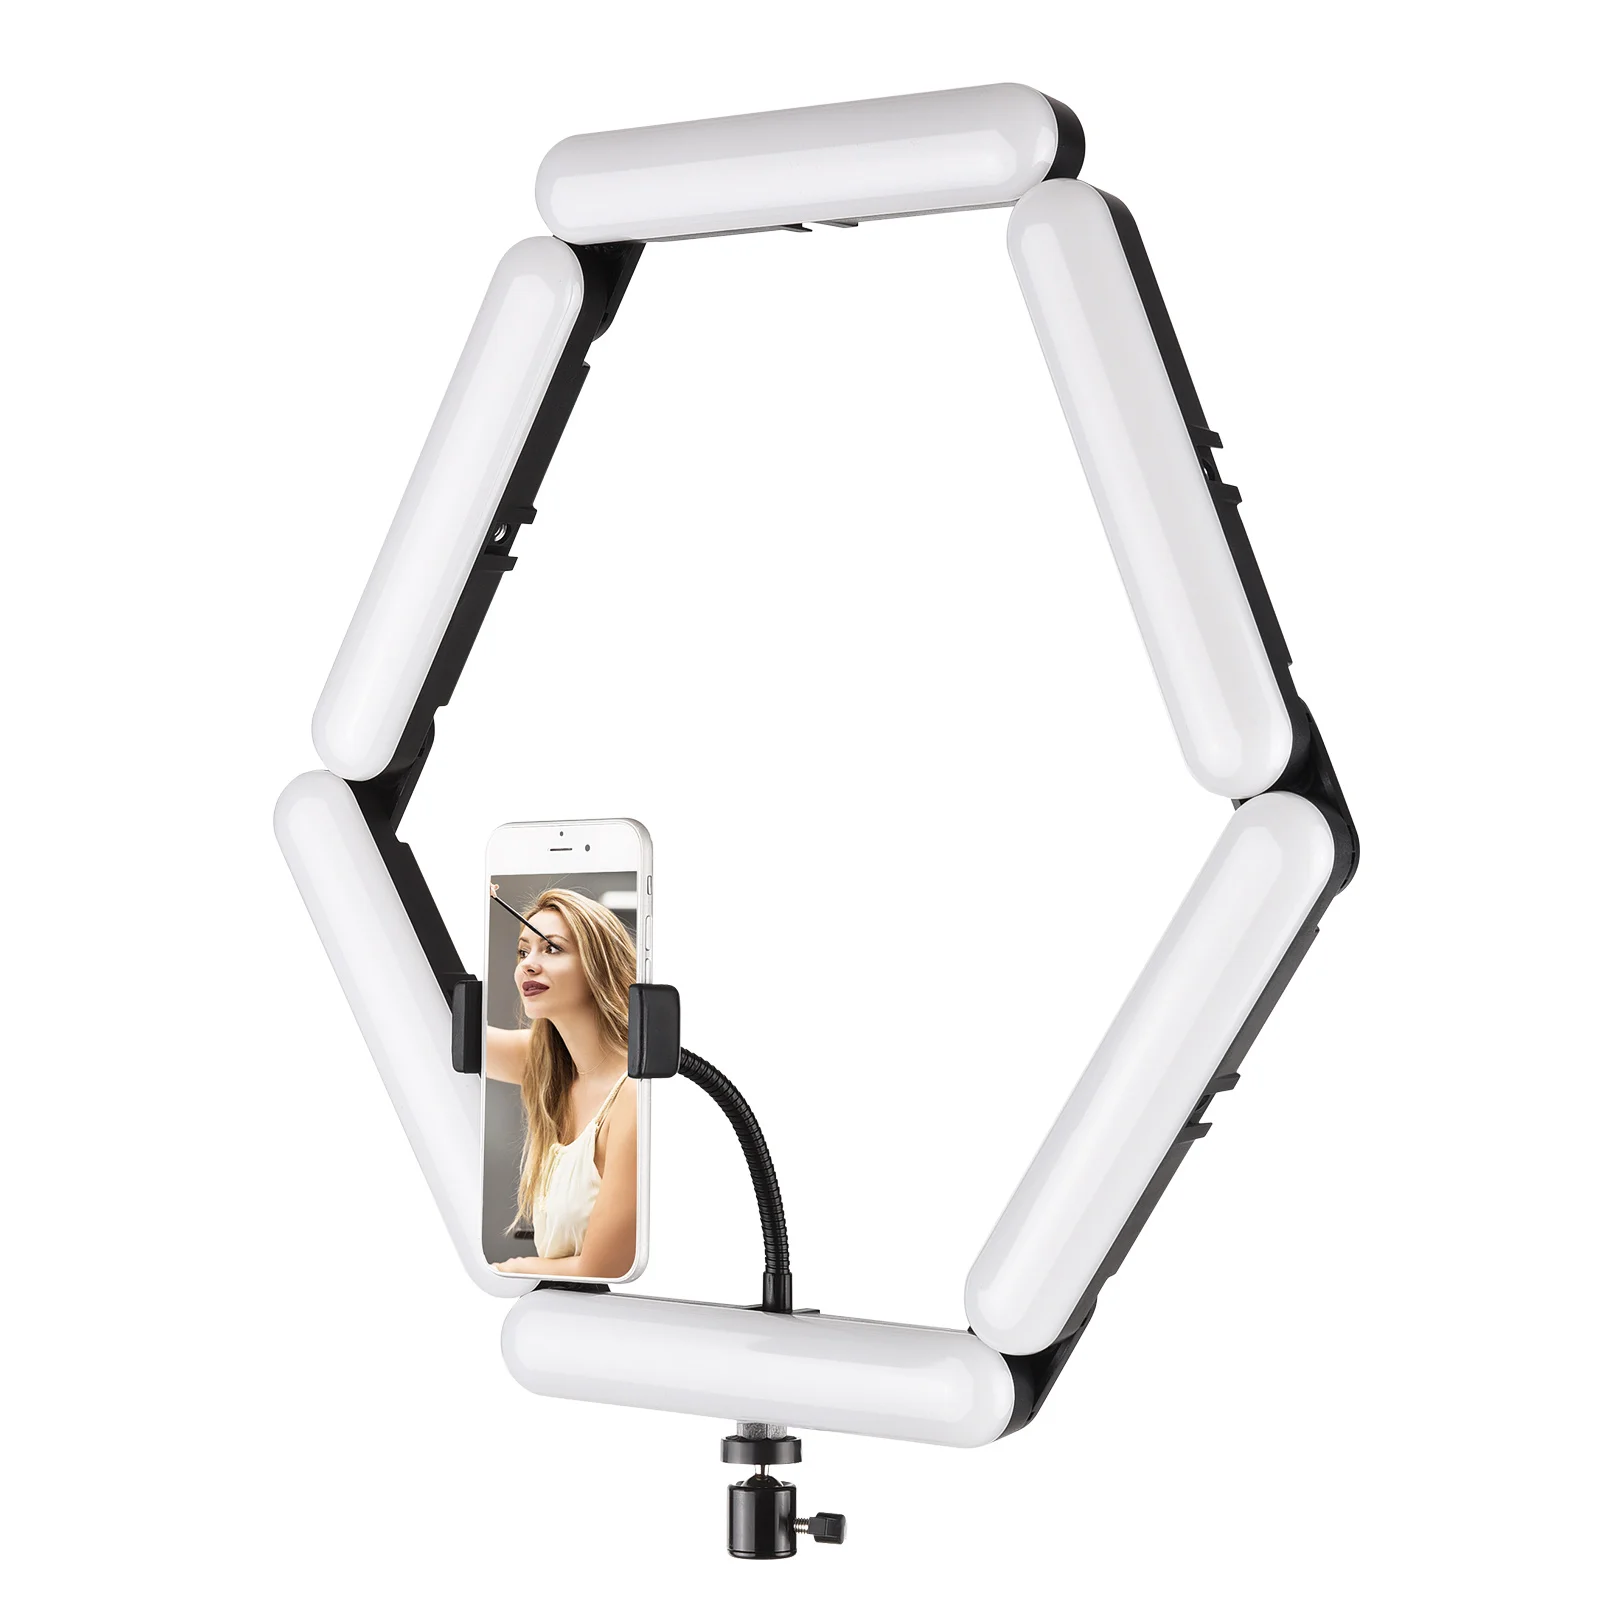 

Splicing 6-Panel LED Light Lamp Photography Fill Light with 3 Lighting Modes Brightness Tripod Ball Head for Selfie Video Lamp